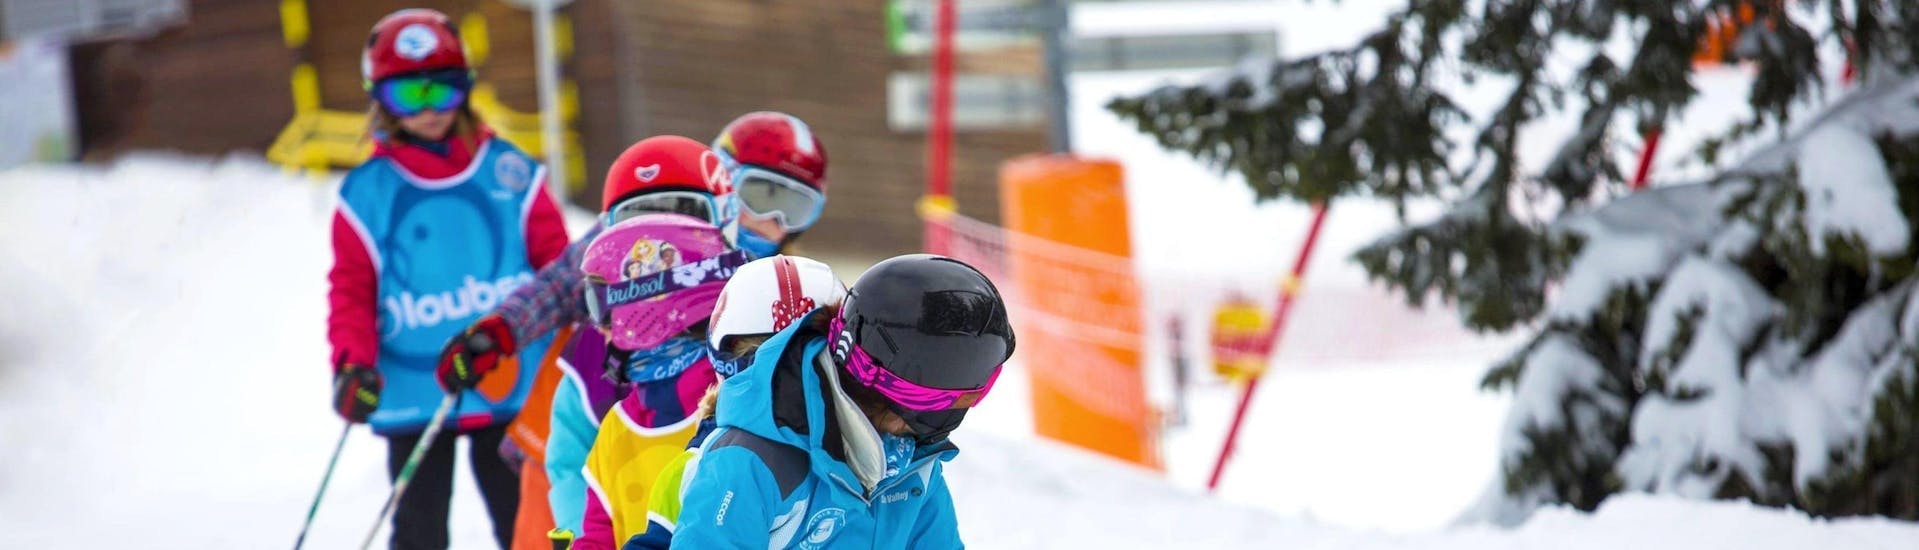 Kids Ski Lessons (7-13 y.) for First Timers.